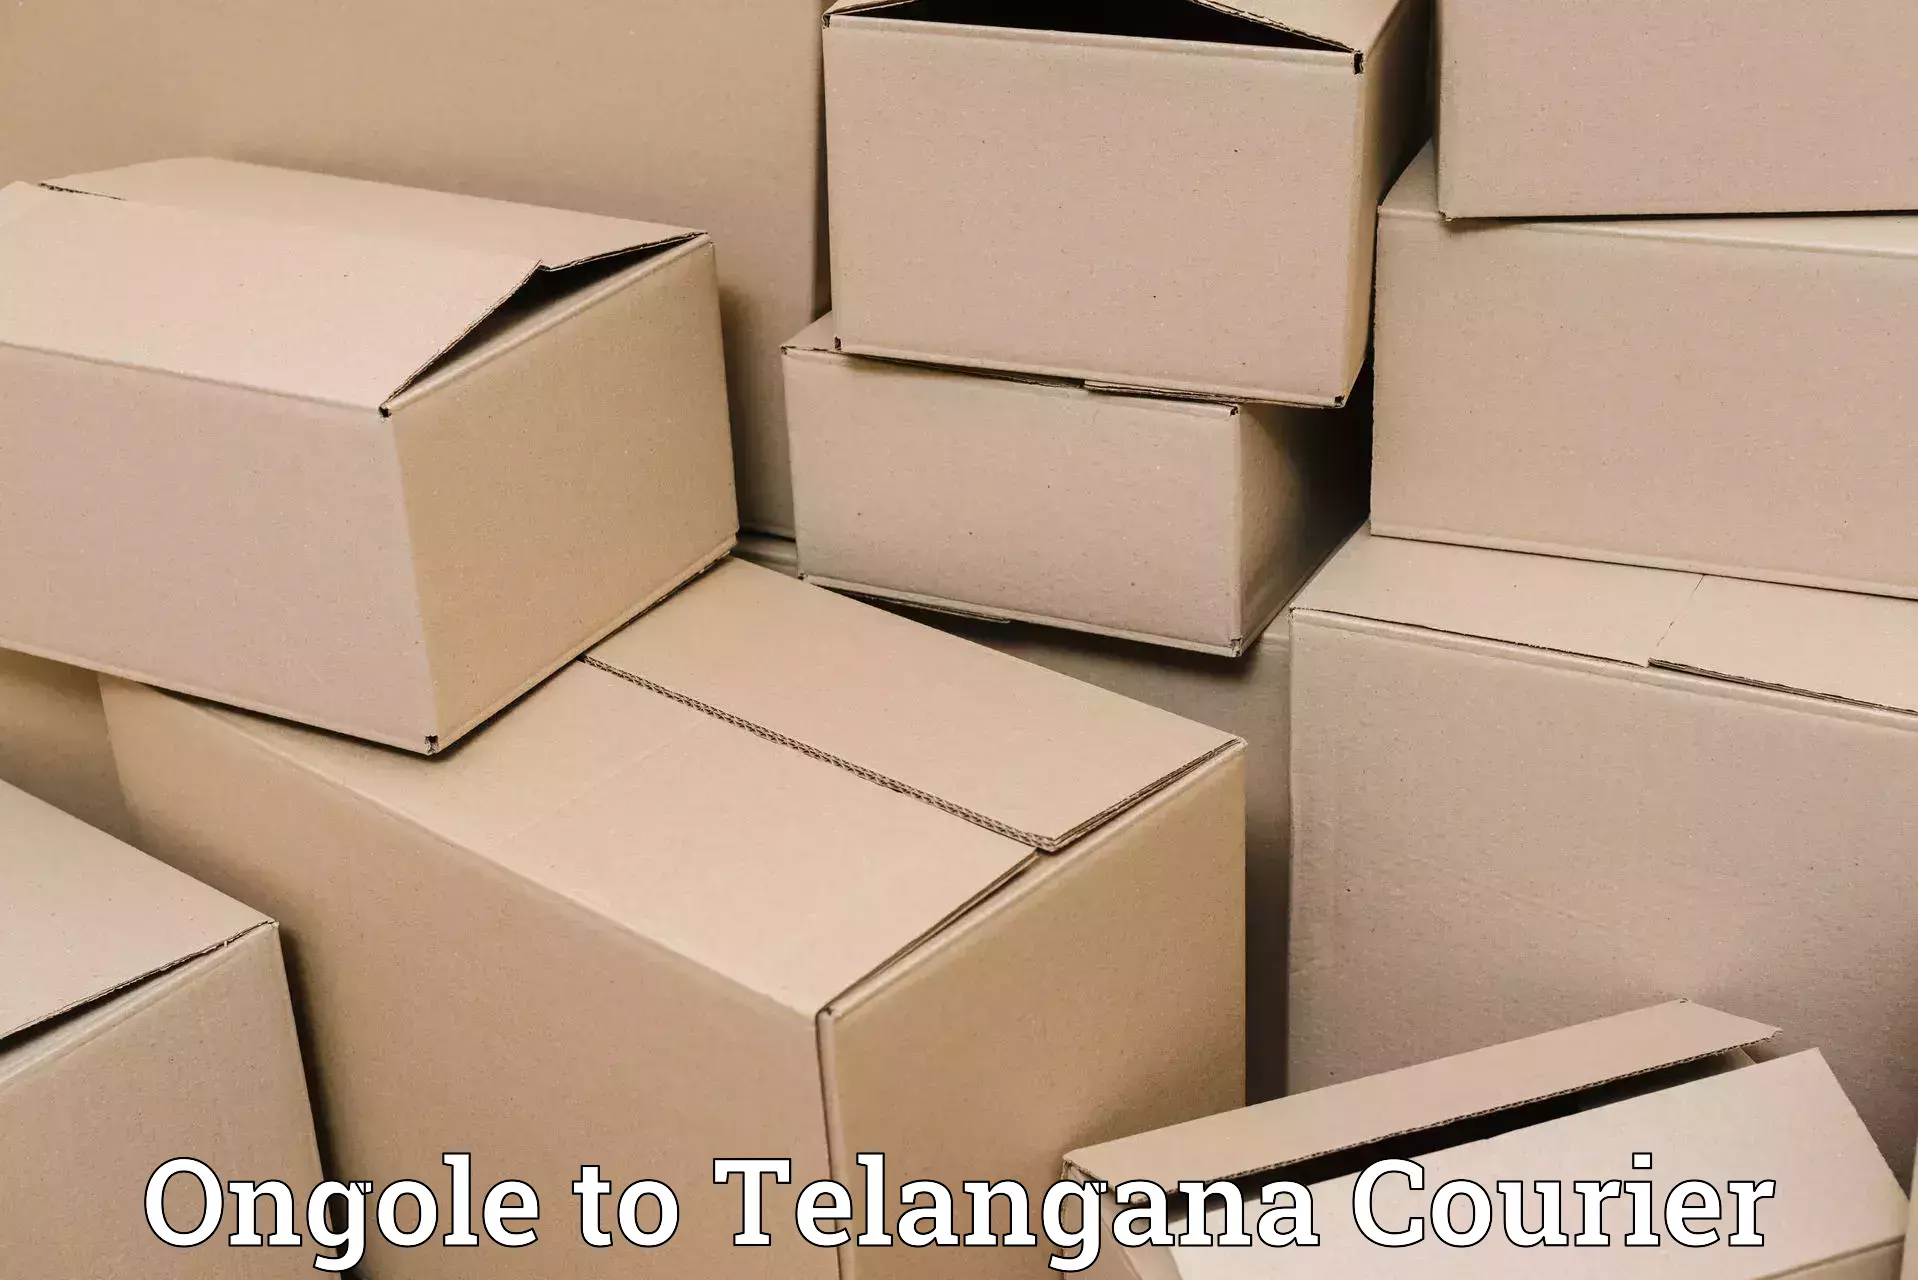 Cargo courier service Ongole to Wyra